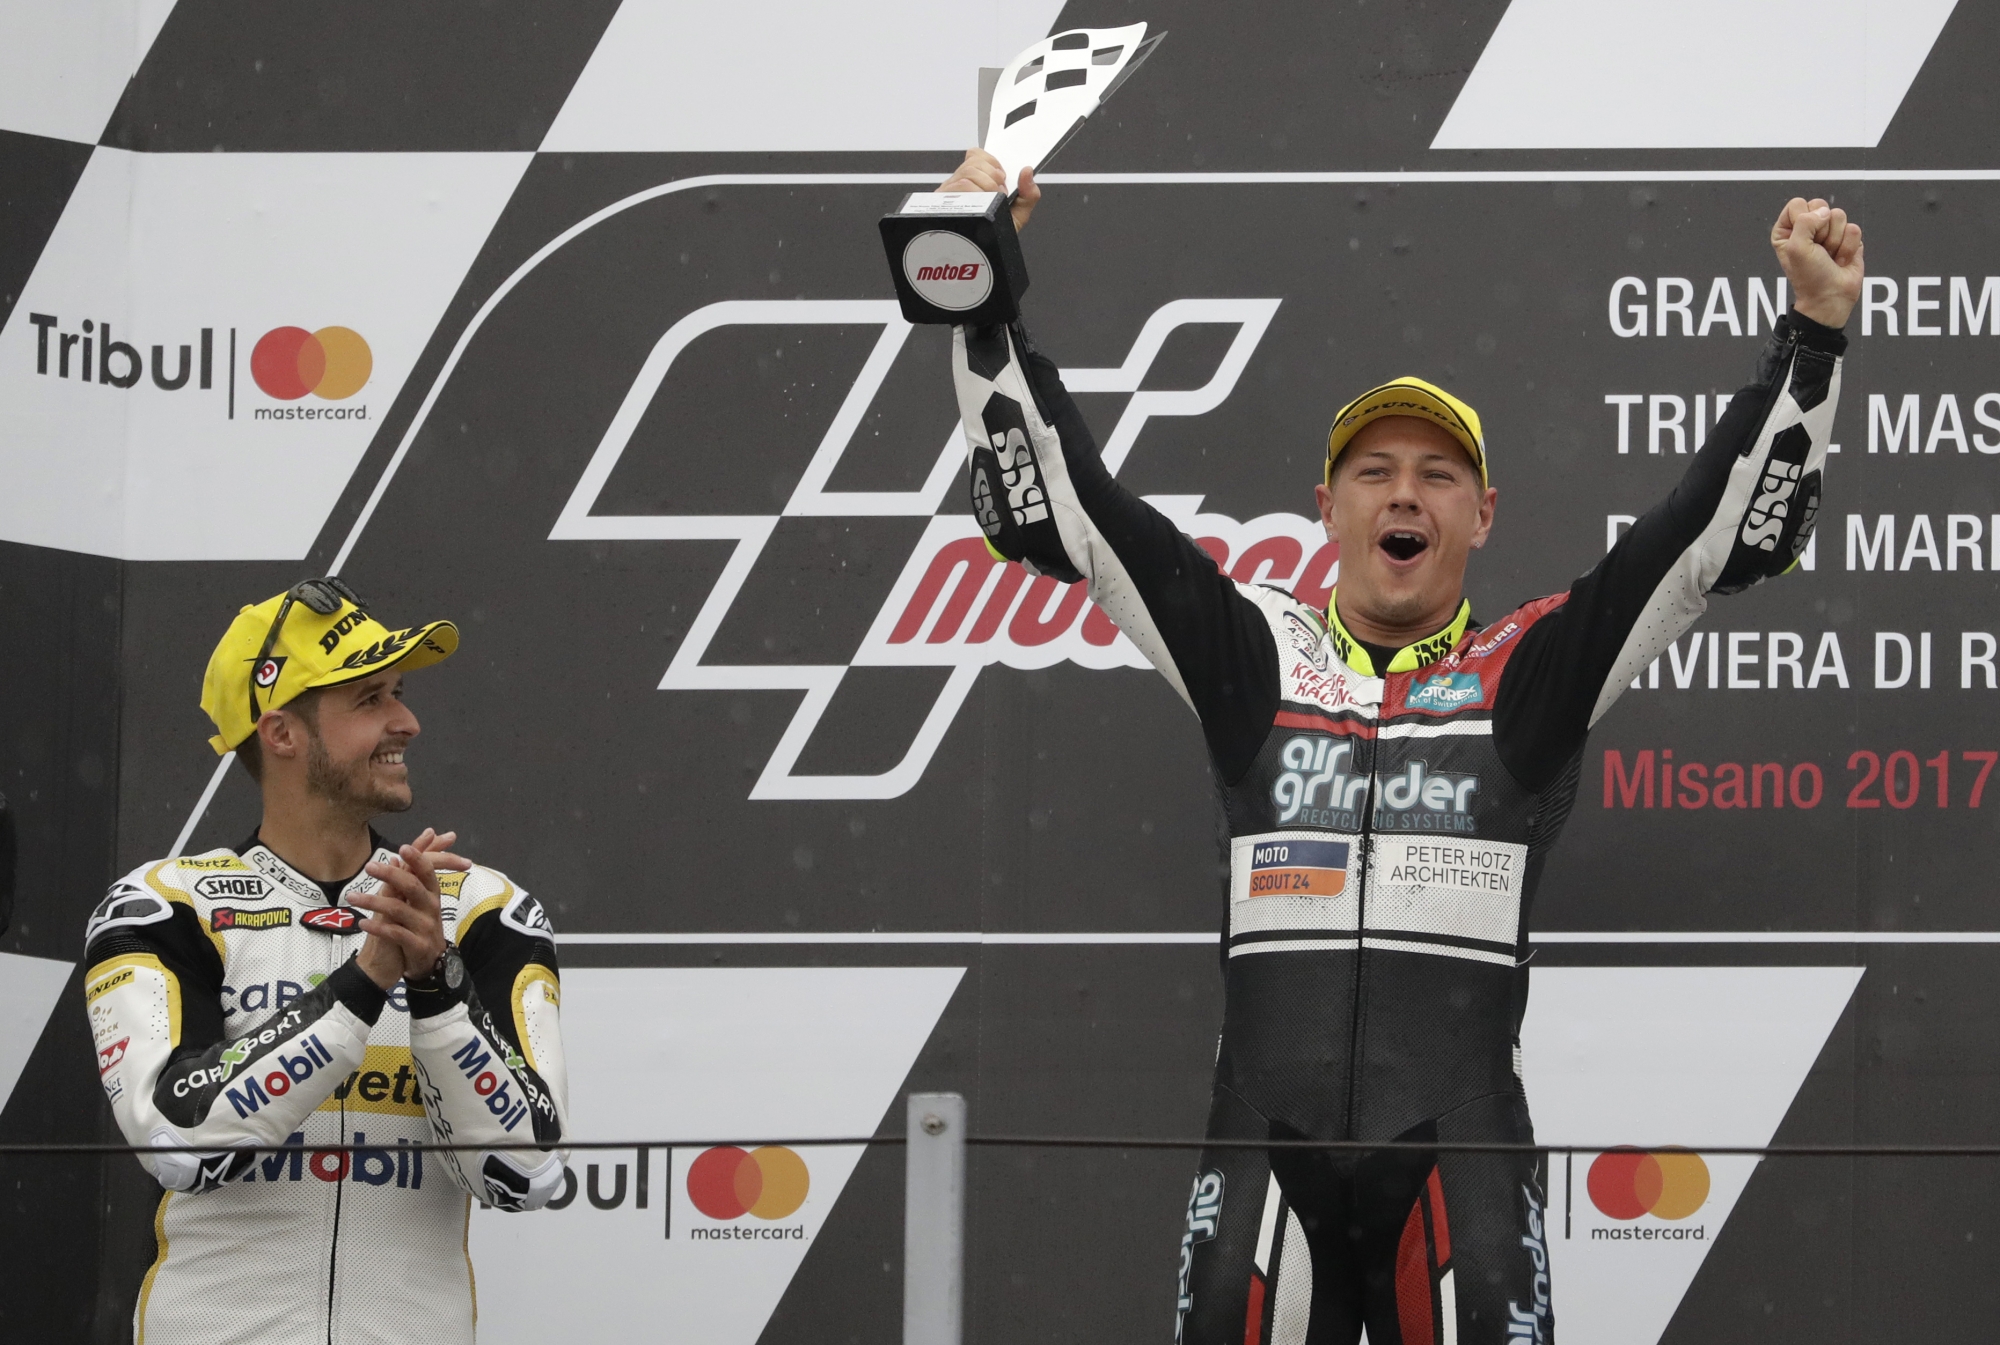 Second placed Moto 2 rider Thomas Luthi of Switzerland, left, applauds as Dominique Aegerter, also of Switzerland, celebrates on the podium after winning the San Marino Motorcycle Grand Prix at the Misano circuit in Misano Adriatico, Italy, Sunday, Sept. 10, 2017. (AP Photo/Antonio Calanni) Italy San Marino Motorcycle Grand Prix